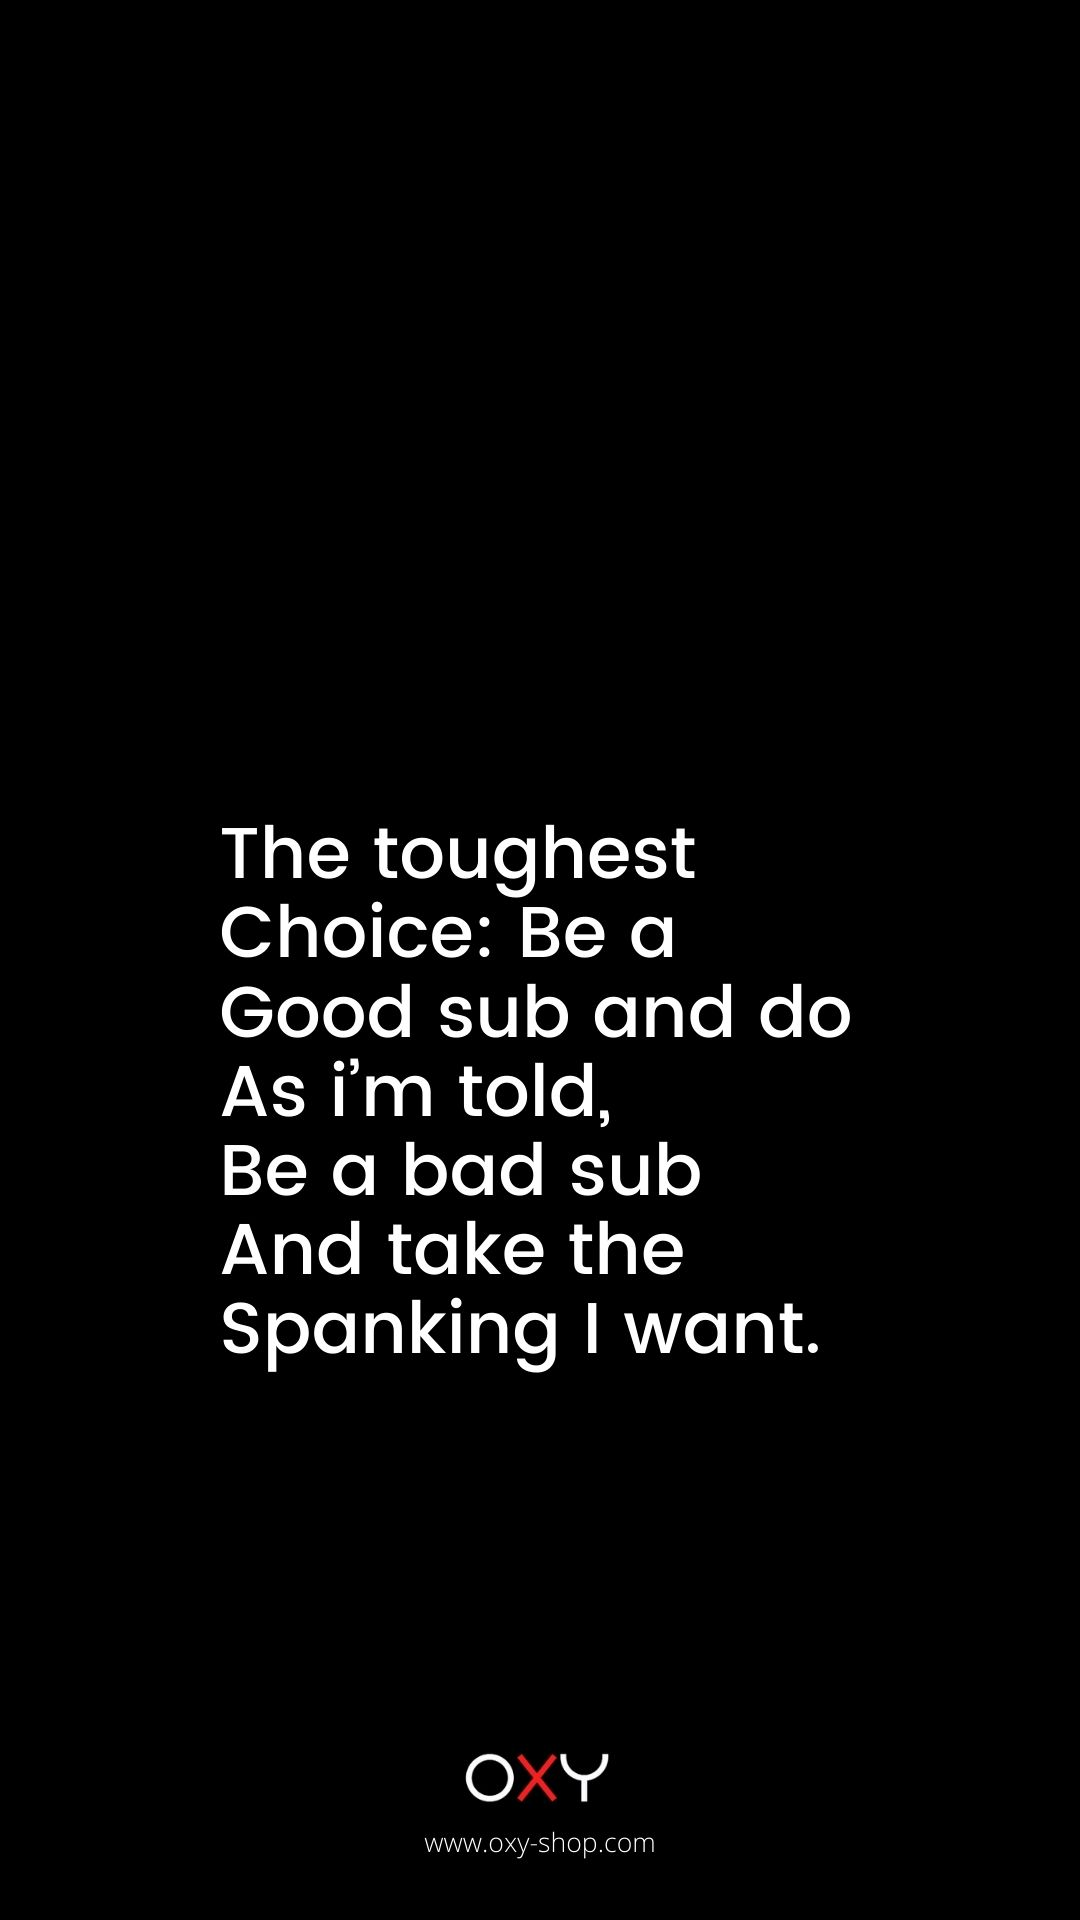 The toughest choice be a good sub and do as I'm told, be a bad sub and take the spanking I want. - BDSM wallpaper